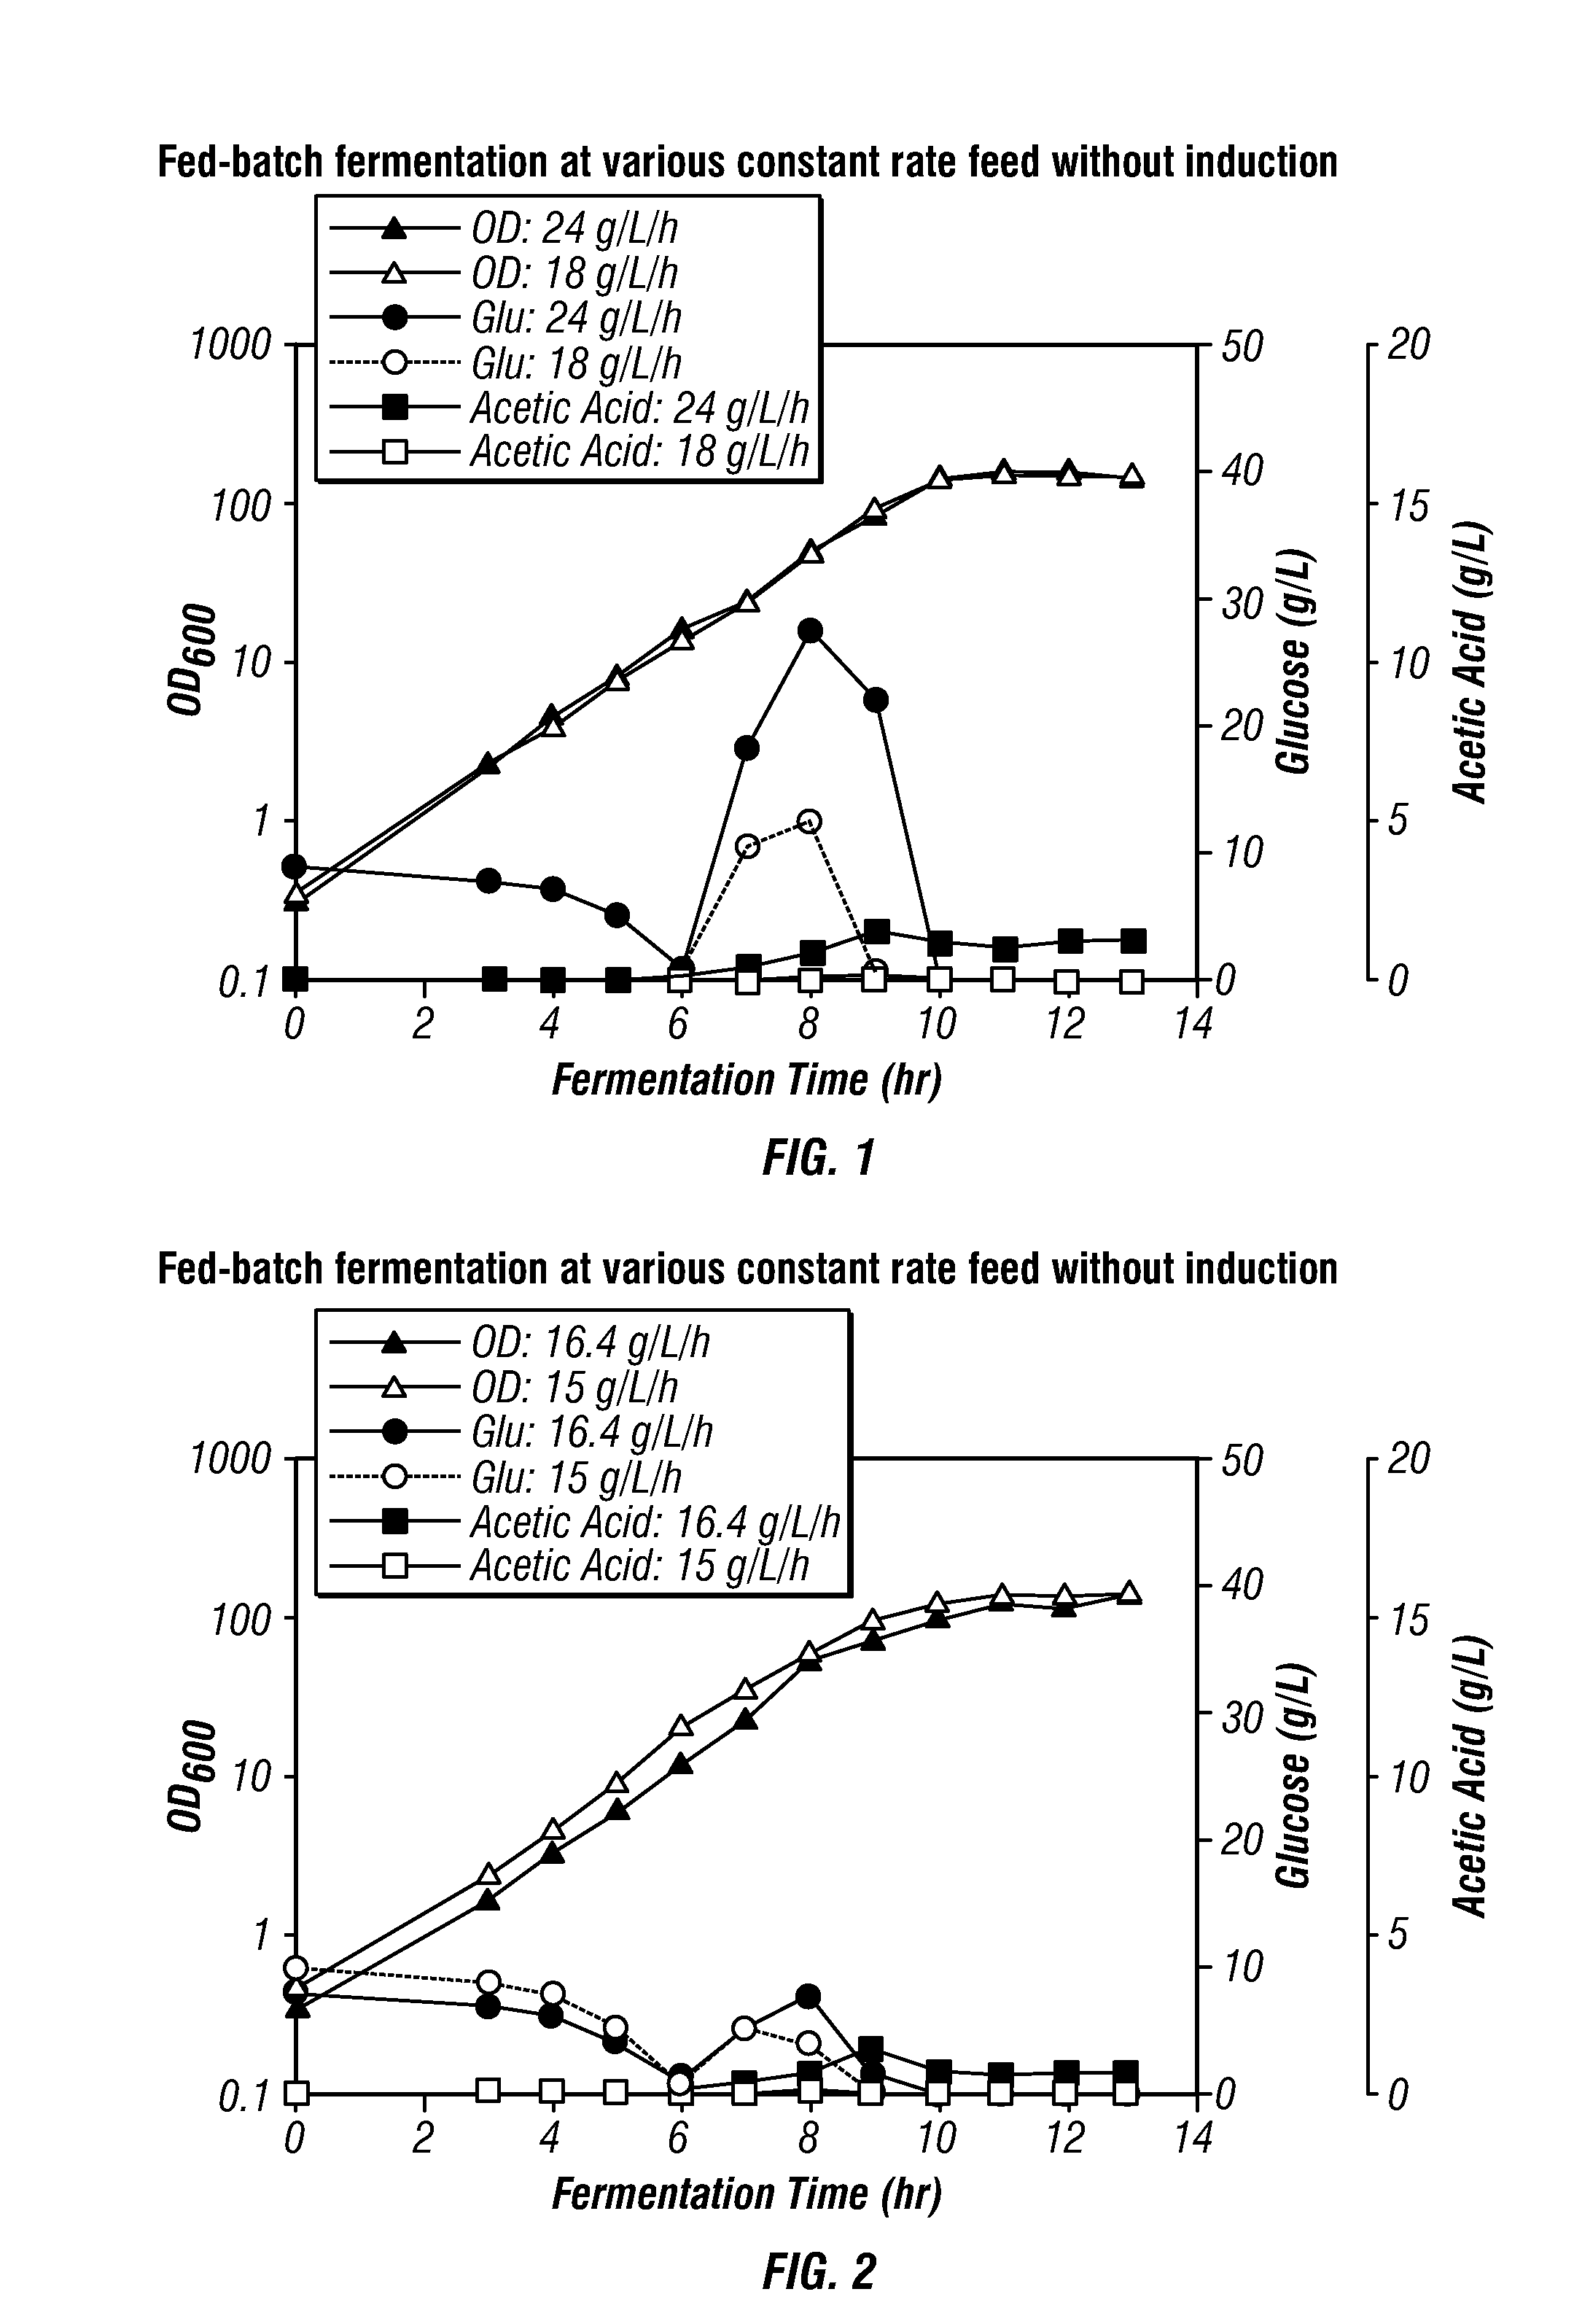 High-cell density fed-batch fermentation process for producing recombinant protein